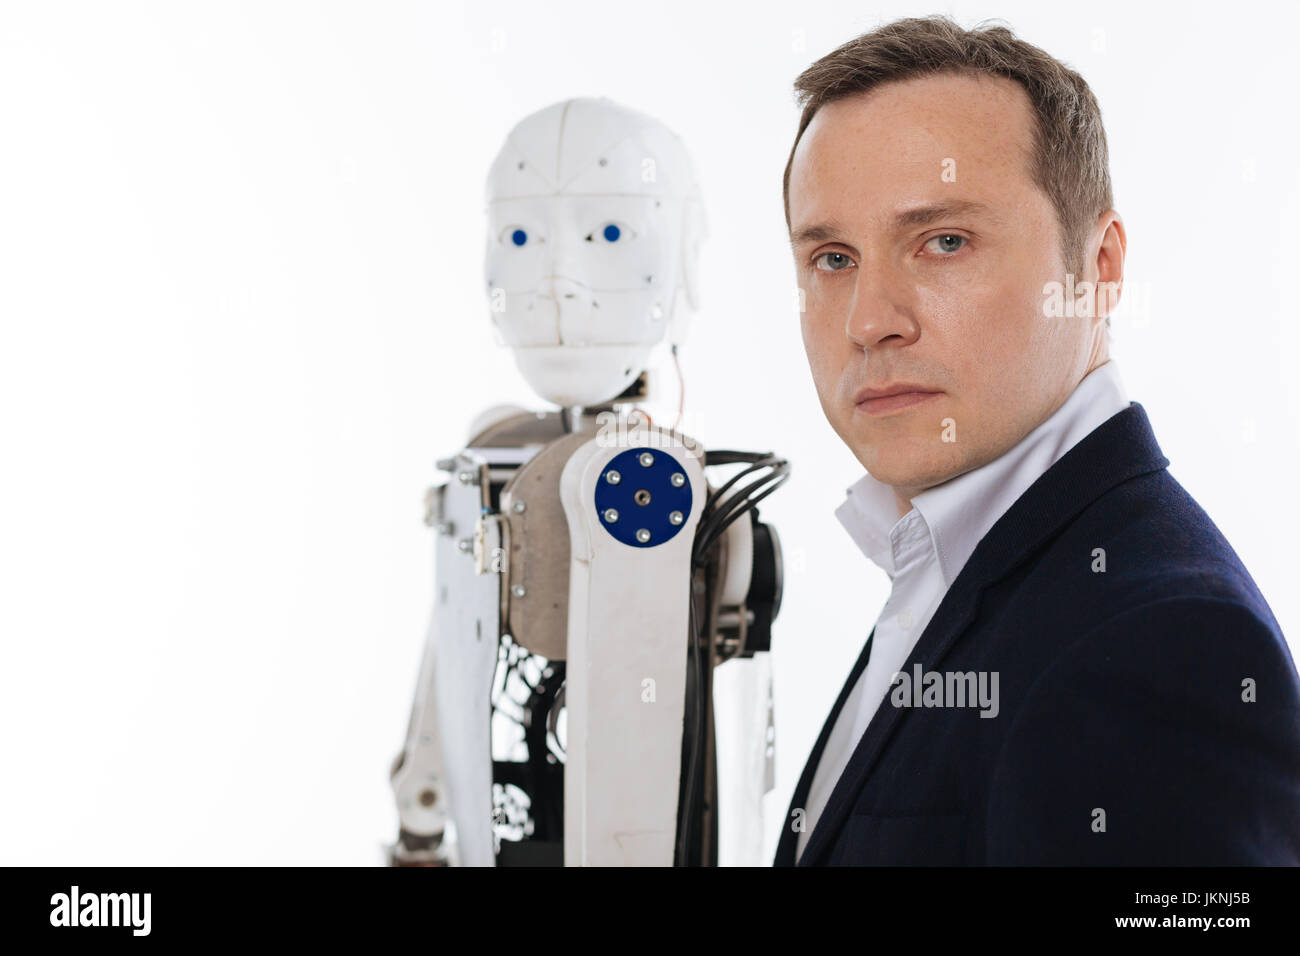 Progressive inventor and his robot standing in the same poses Stock Photo